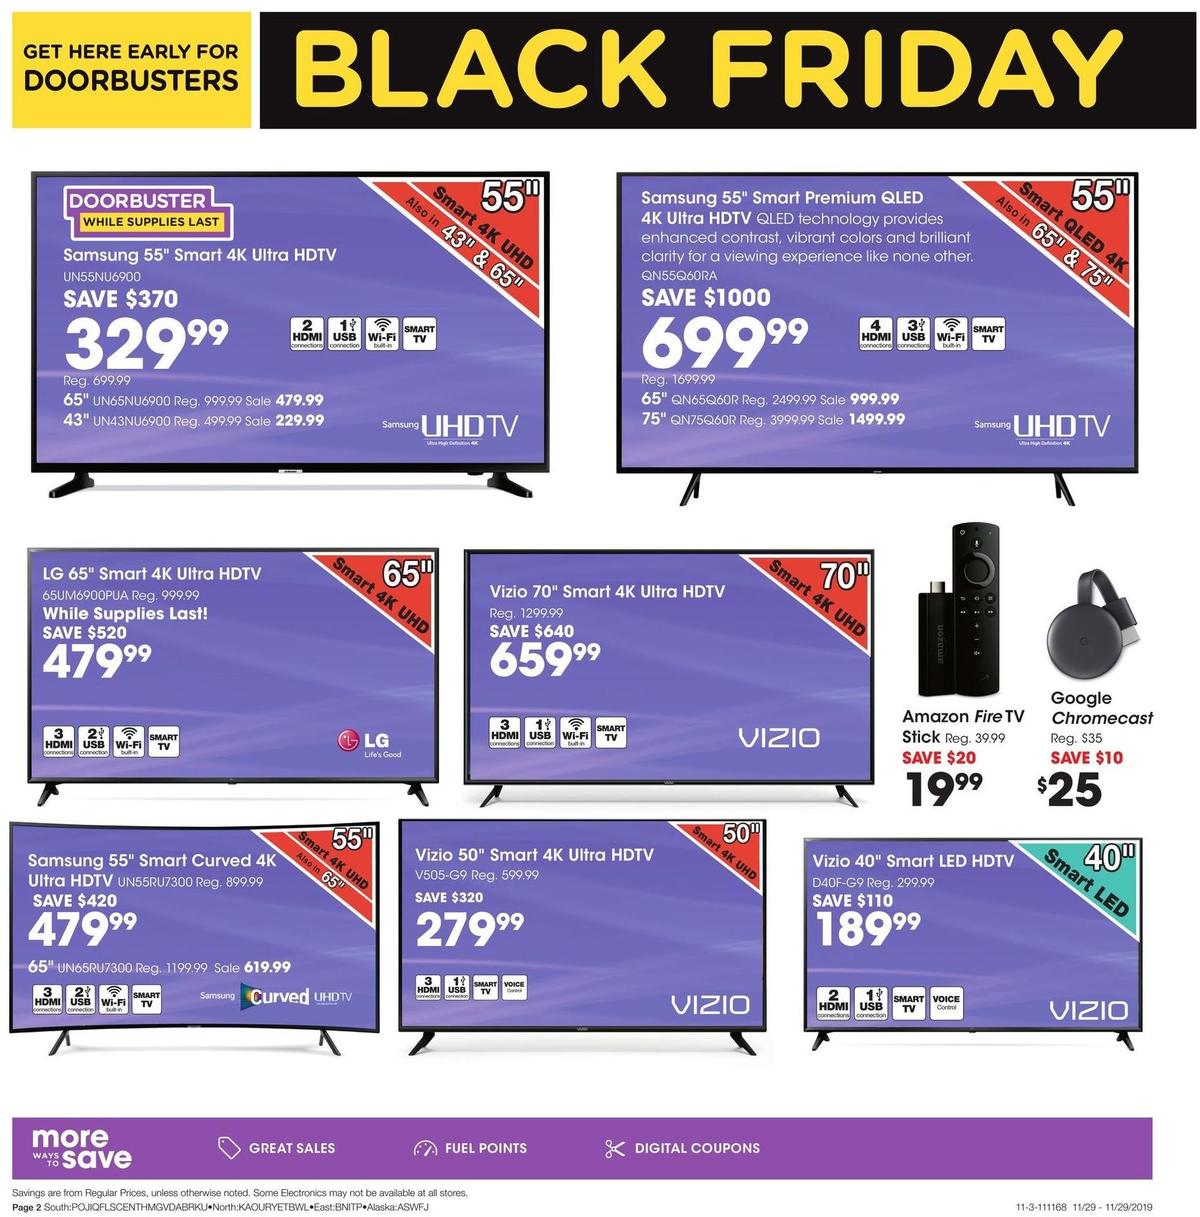 Fred Meyer Black Friday Weekly Ad from November 29